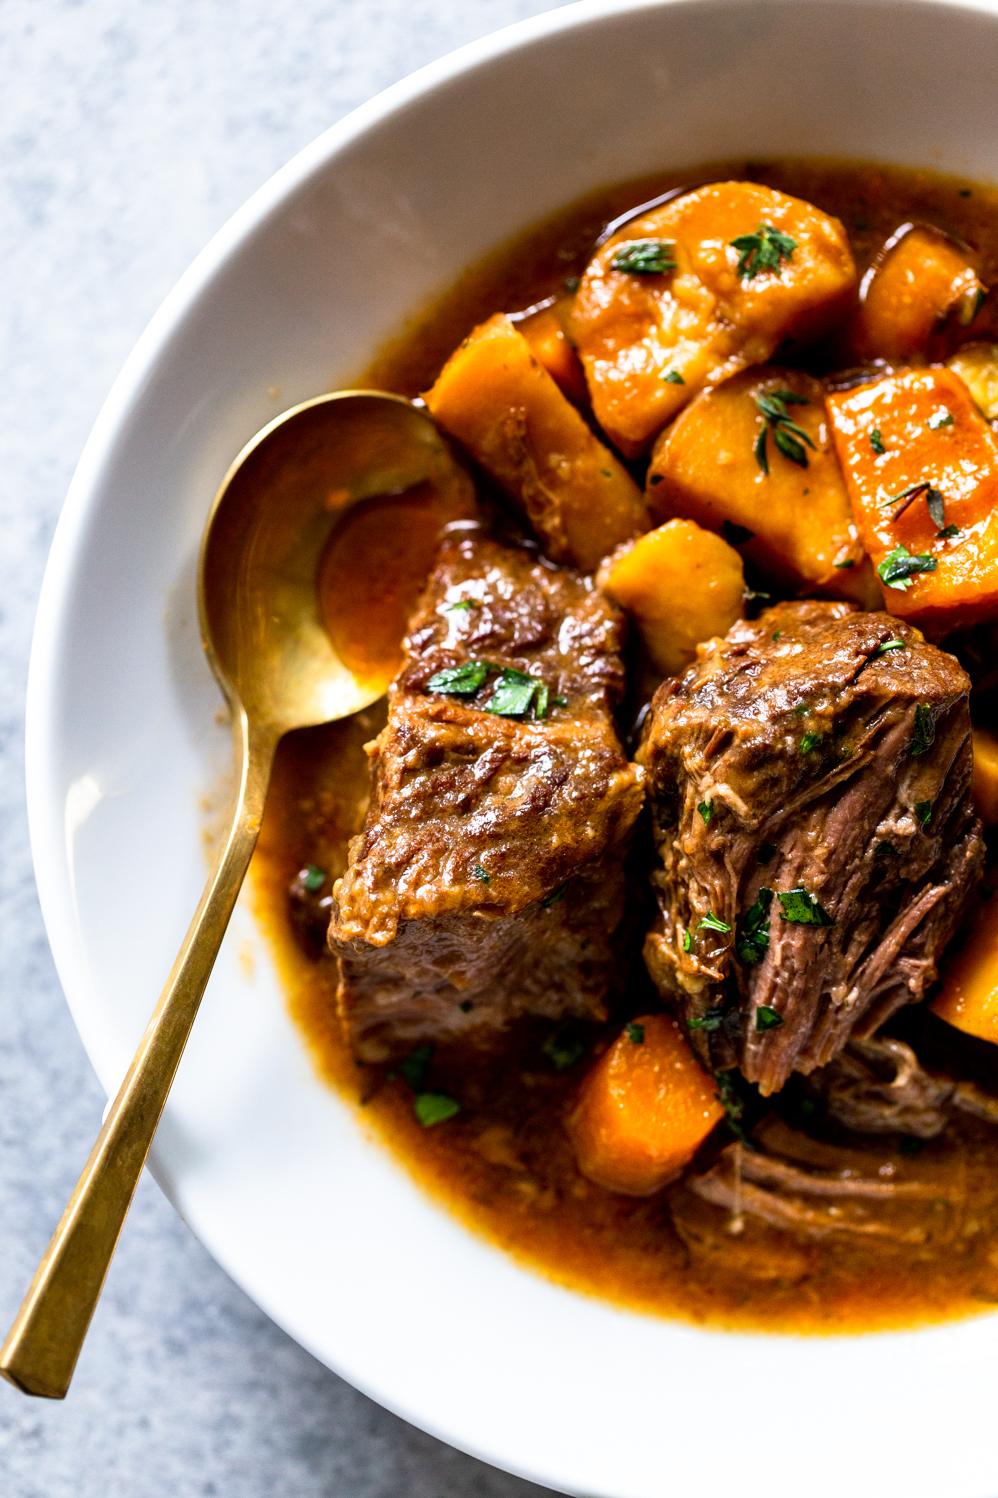  Rich and hearty Crock Pot Irish Stew that will warm your soul.